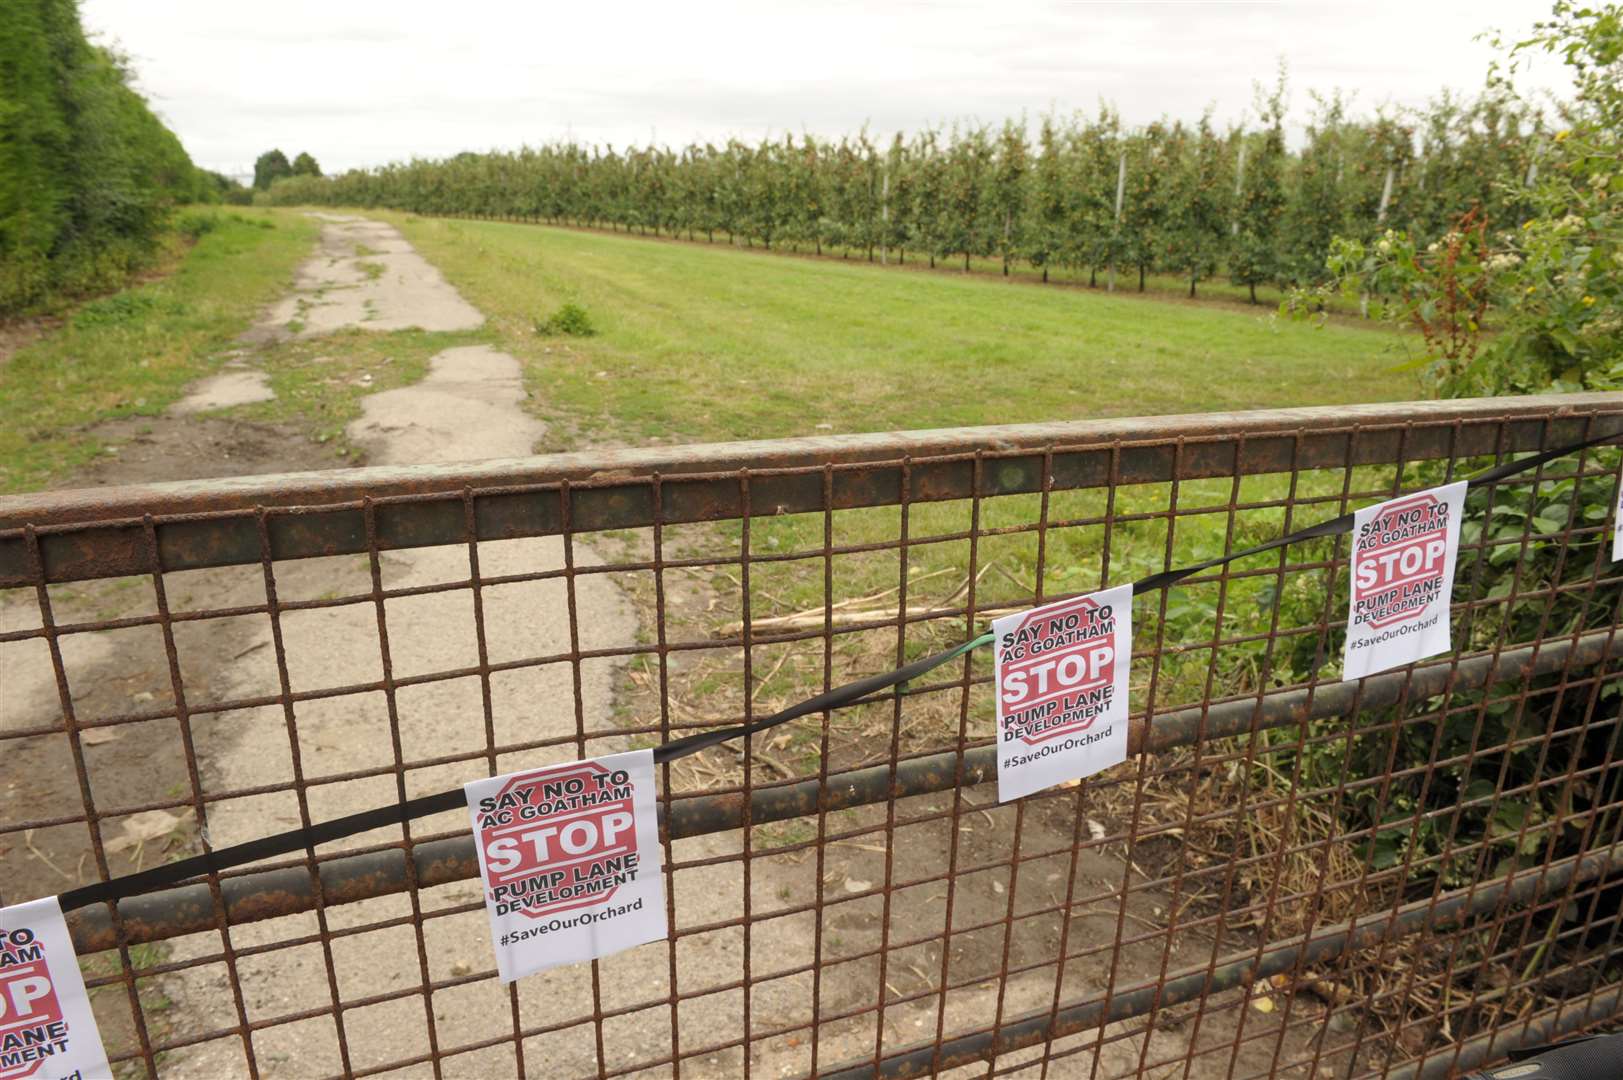 A campaing group was set up to try and stop the development in the orchards in Rainham. Picture: Steve Crispe